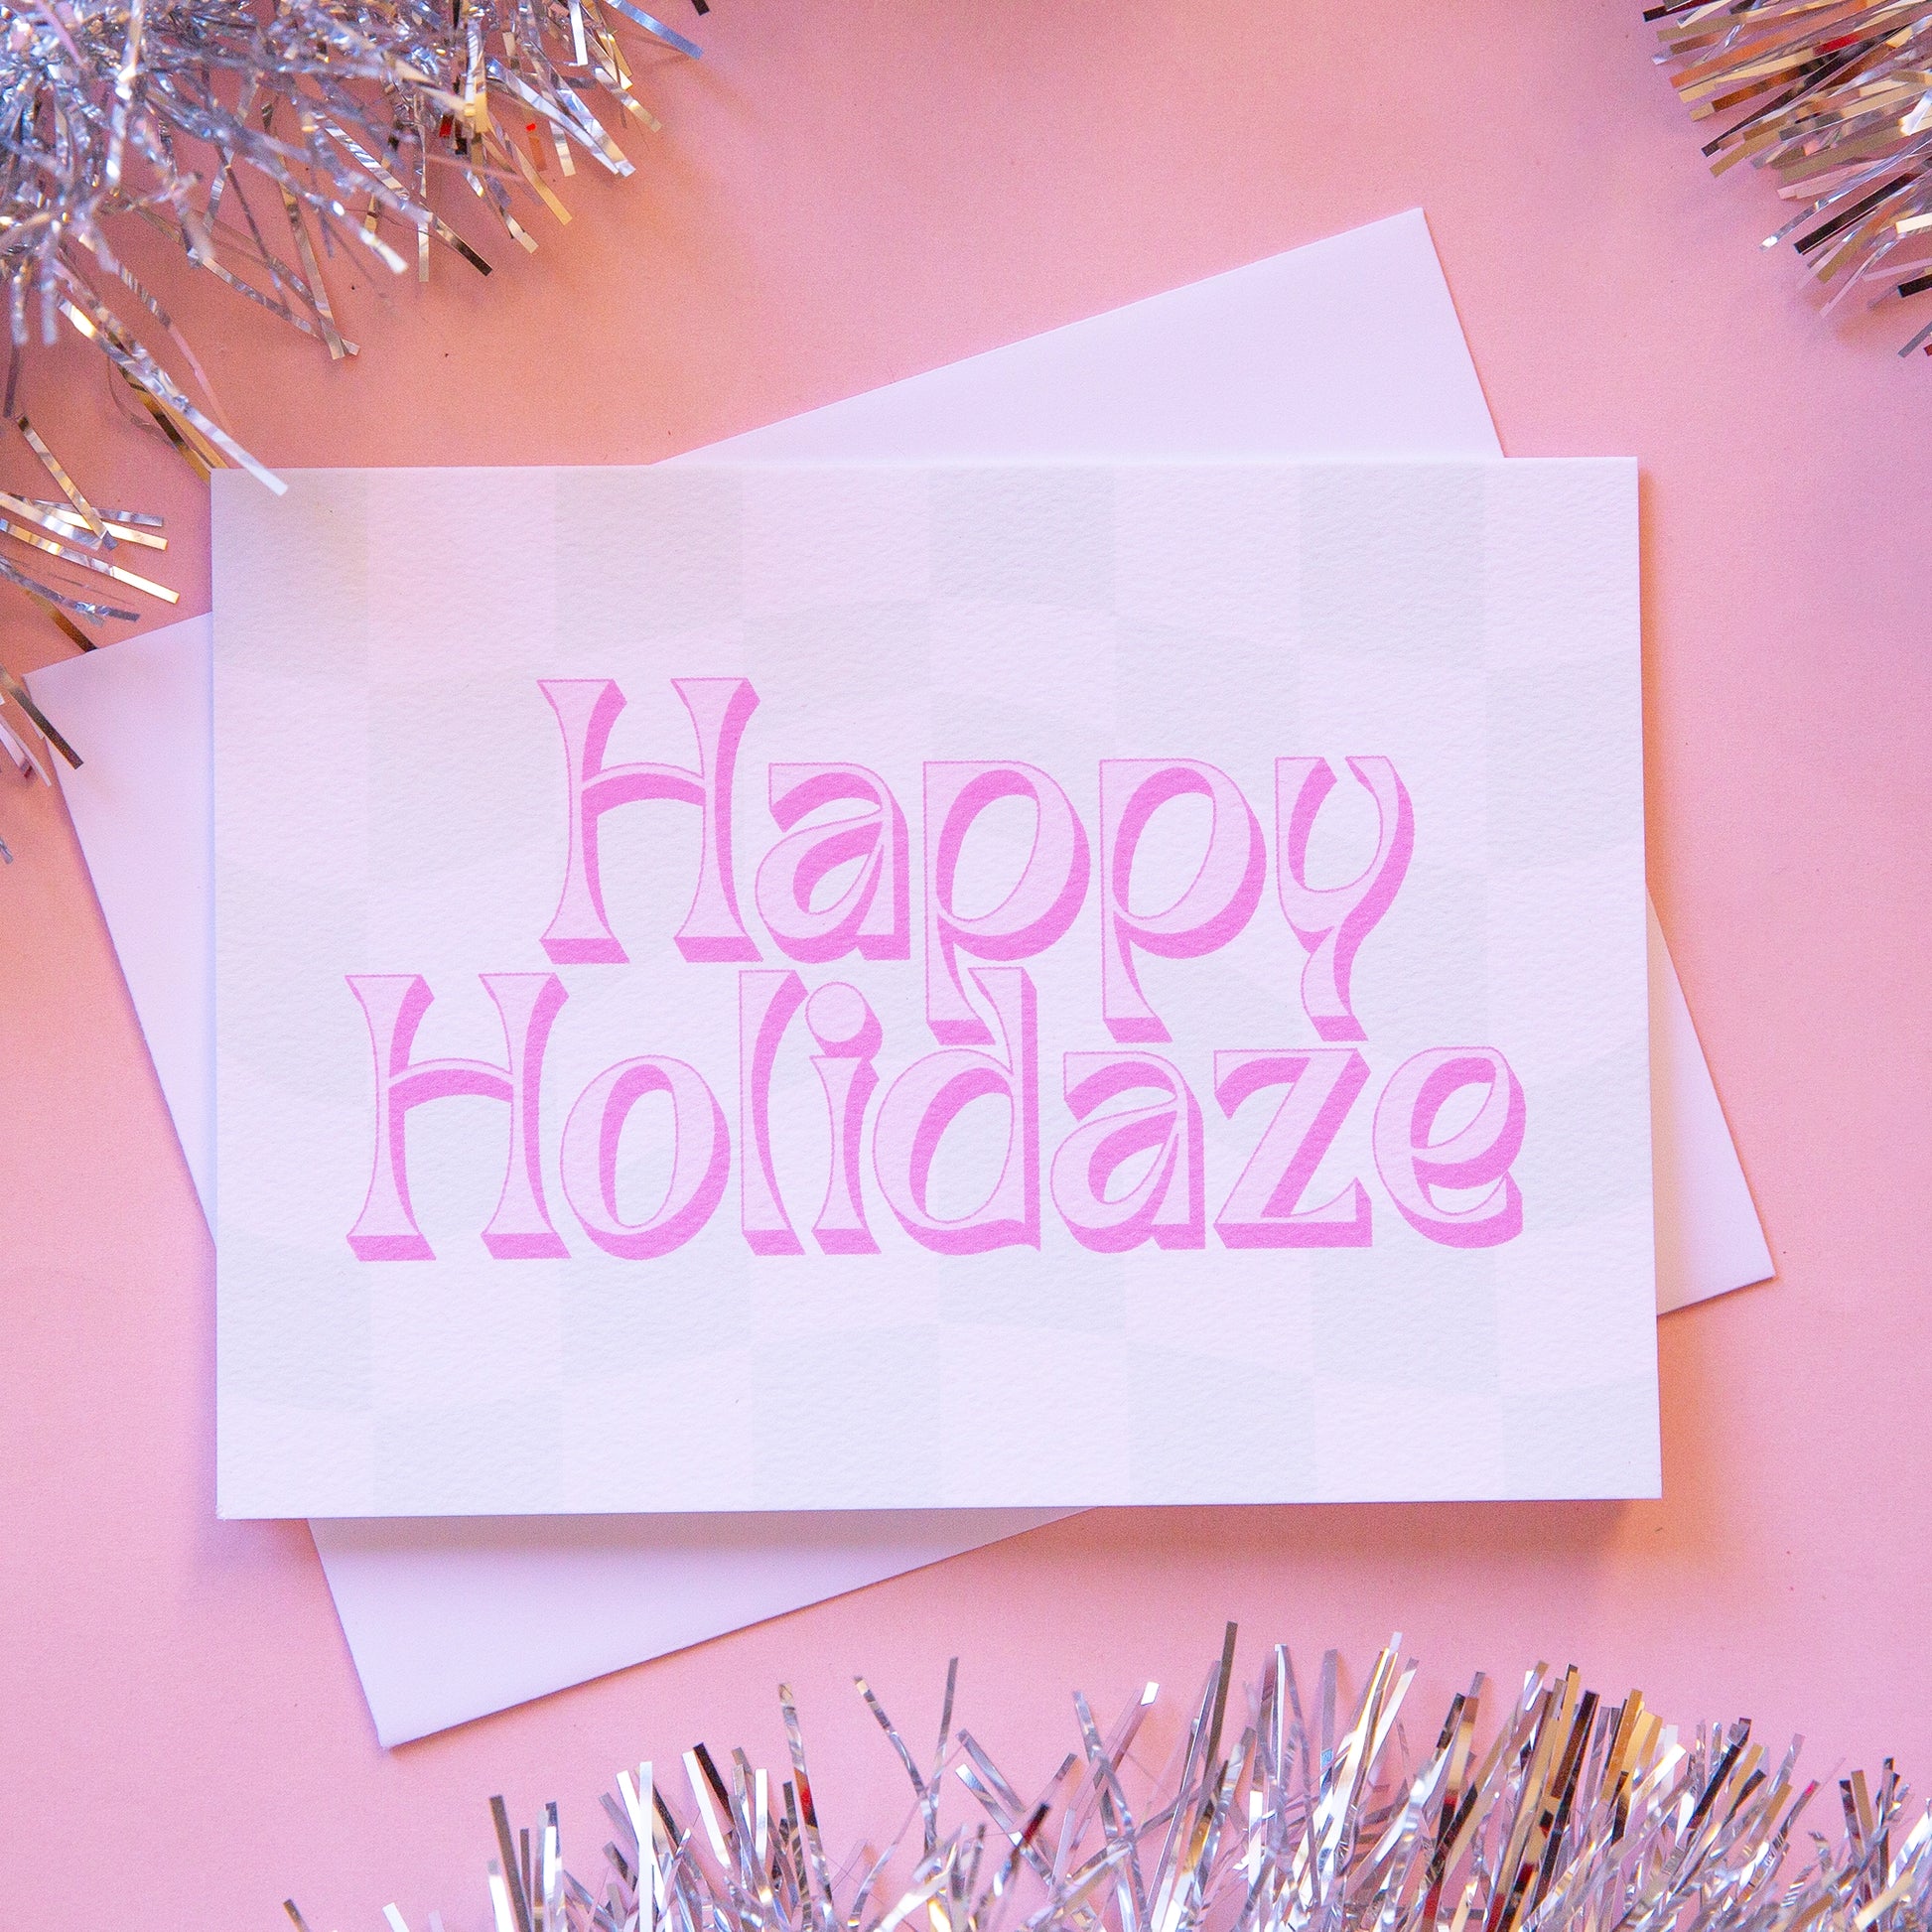 Pale mint and cream checkered card that reads 'Happy Holiday' in retro pink lettering with thin magenta shadow. The card is accompanied by a solid white envelope.